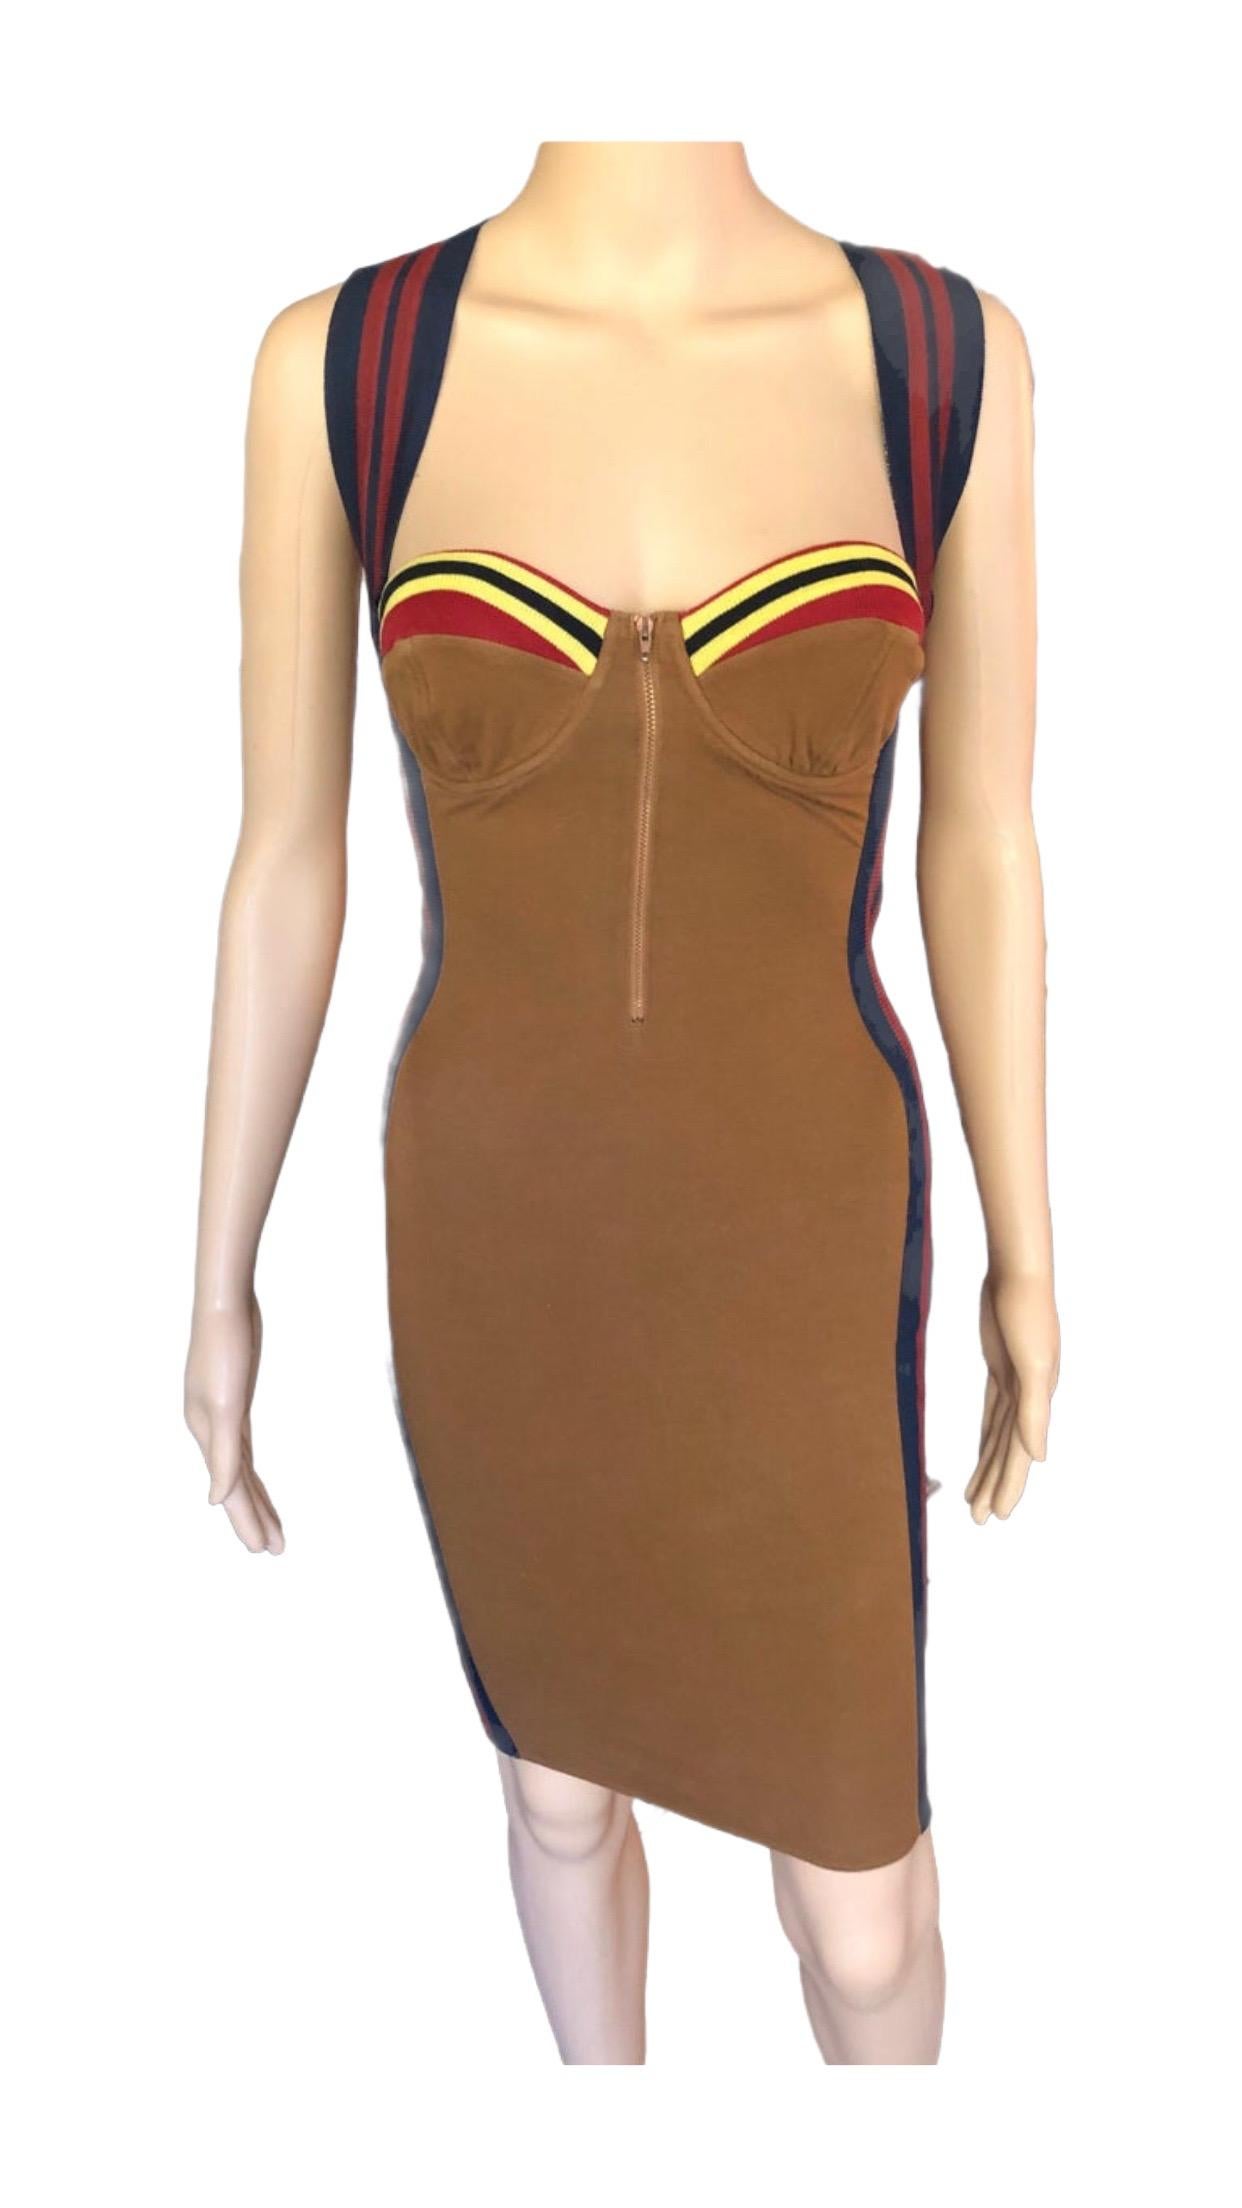 Jean Paul Gaultier 1990's Vintage Bustier Bodycon Knit Mini Dress In Good Condition For Sale In Naples, FL